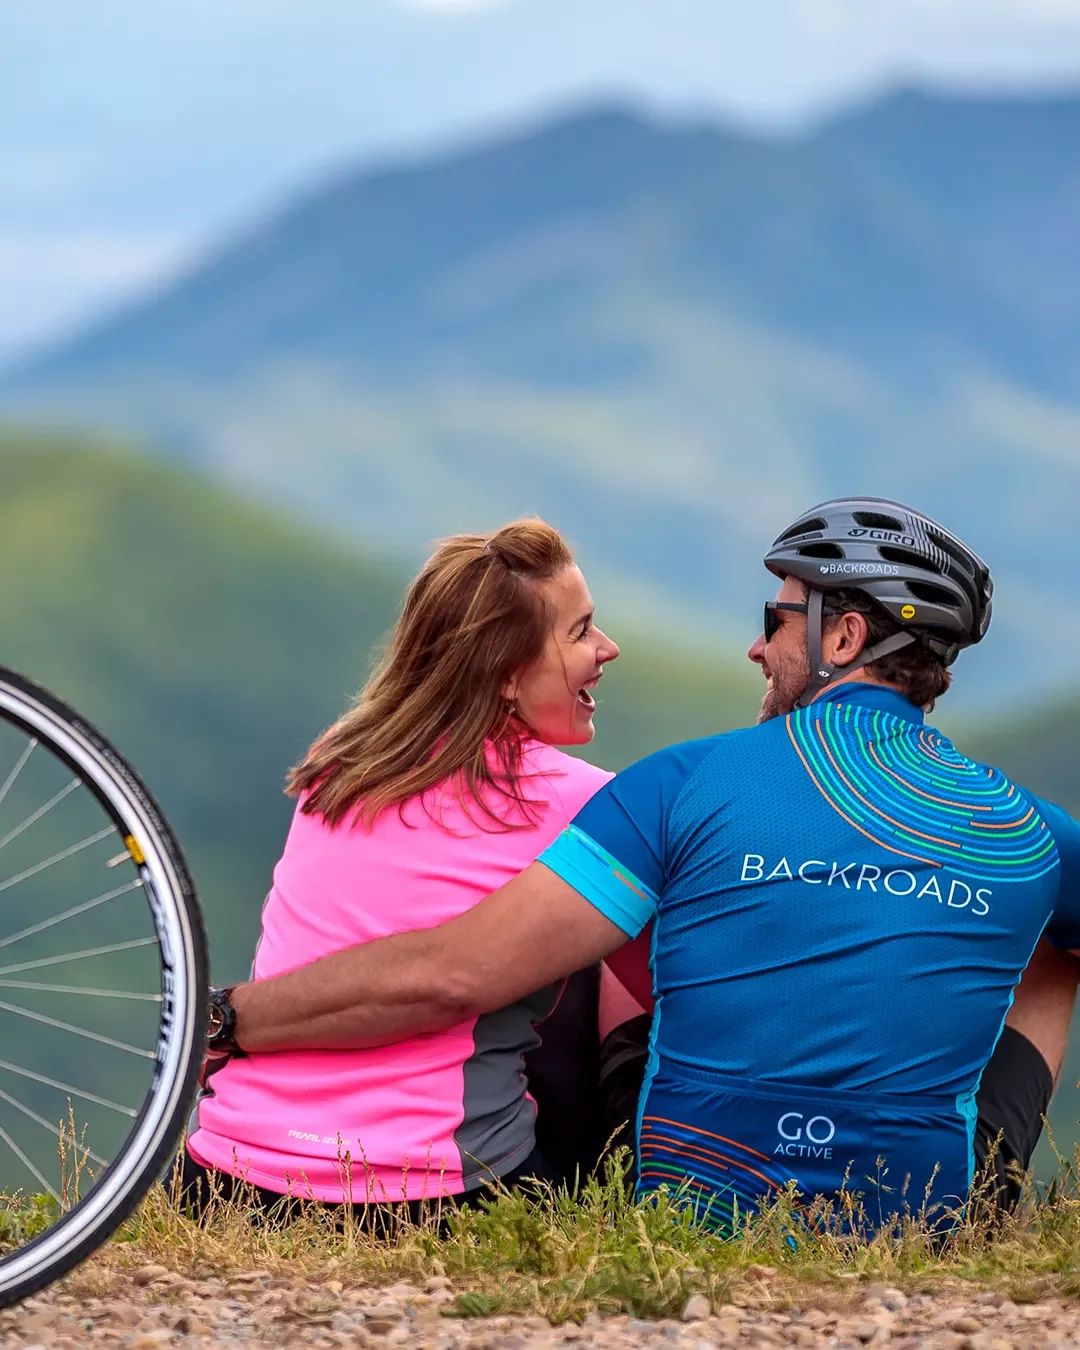 Backroads guests embracing one another after bike ride